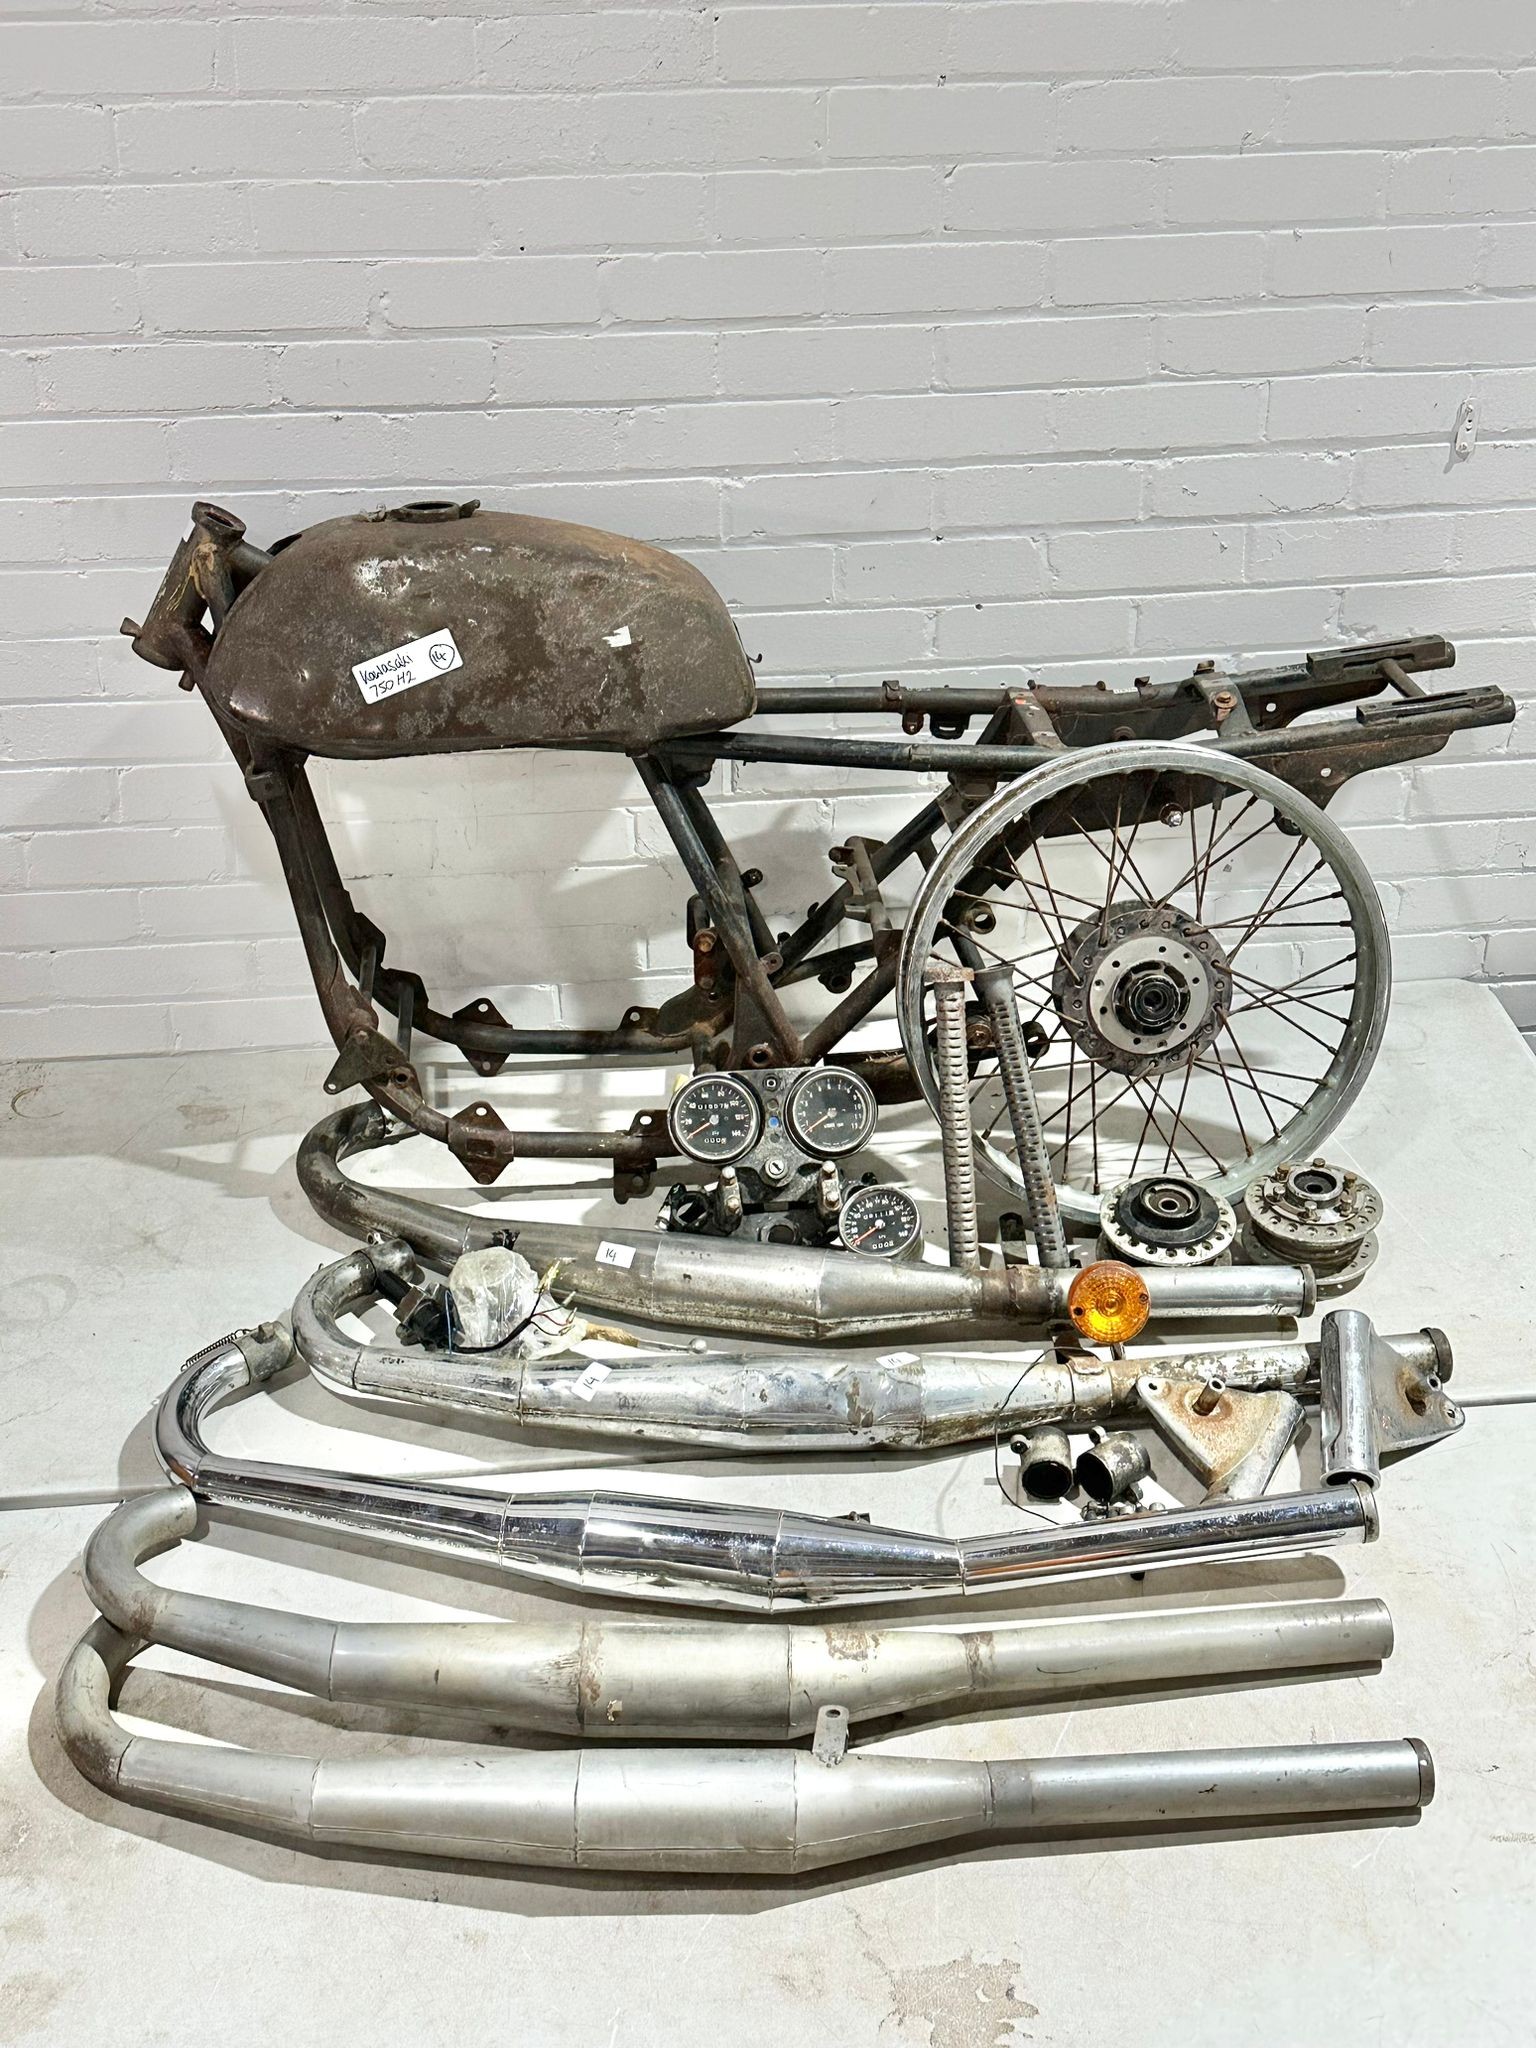 A Kawasaki 750 H2 Widow Maker Frame 1974/5, with exhausts, tank and other various parts.